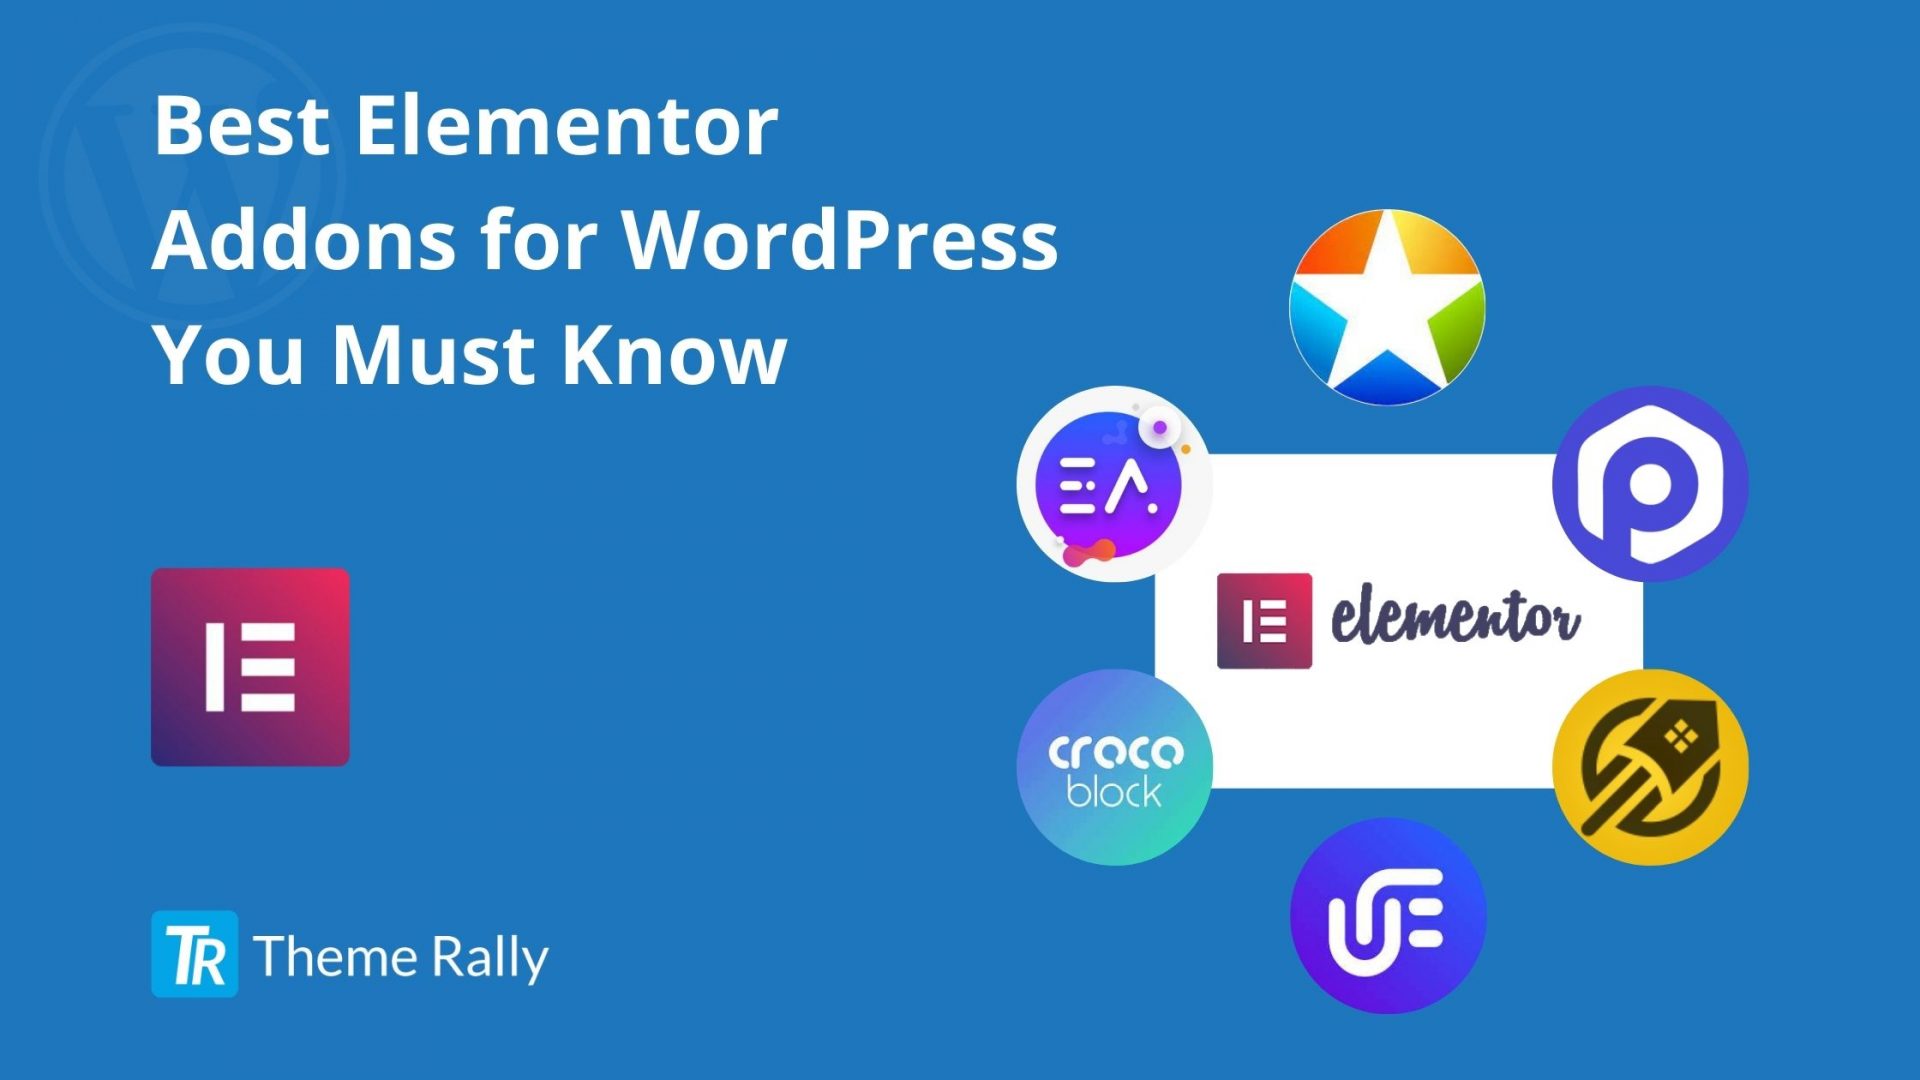 Best Elementor Addons for WordPress You Must Know